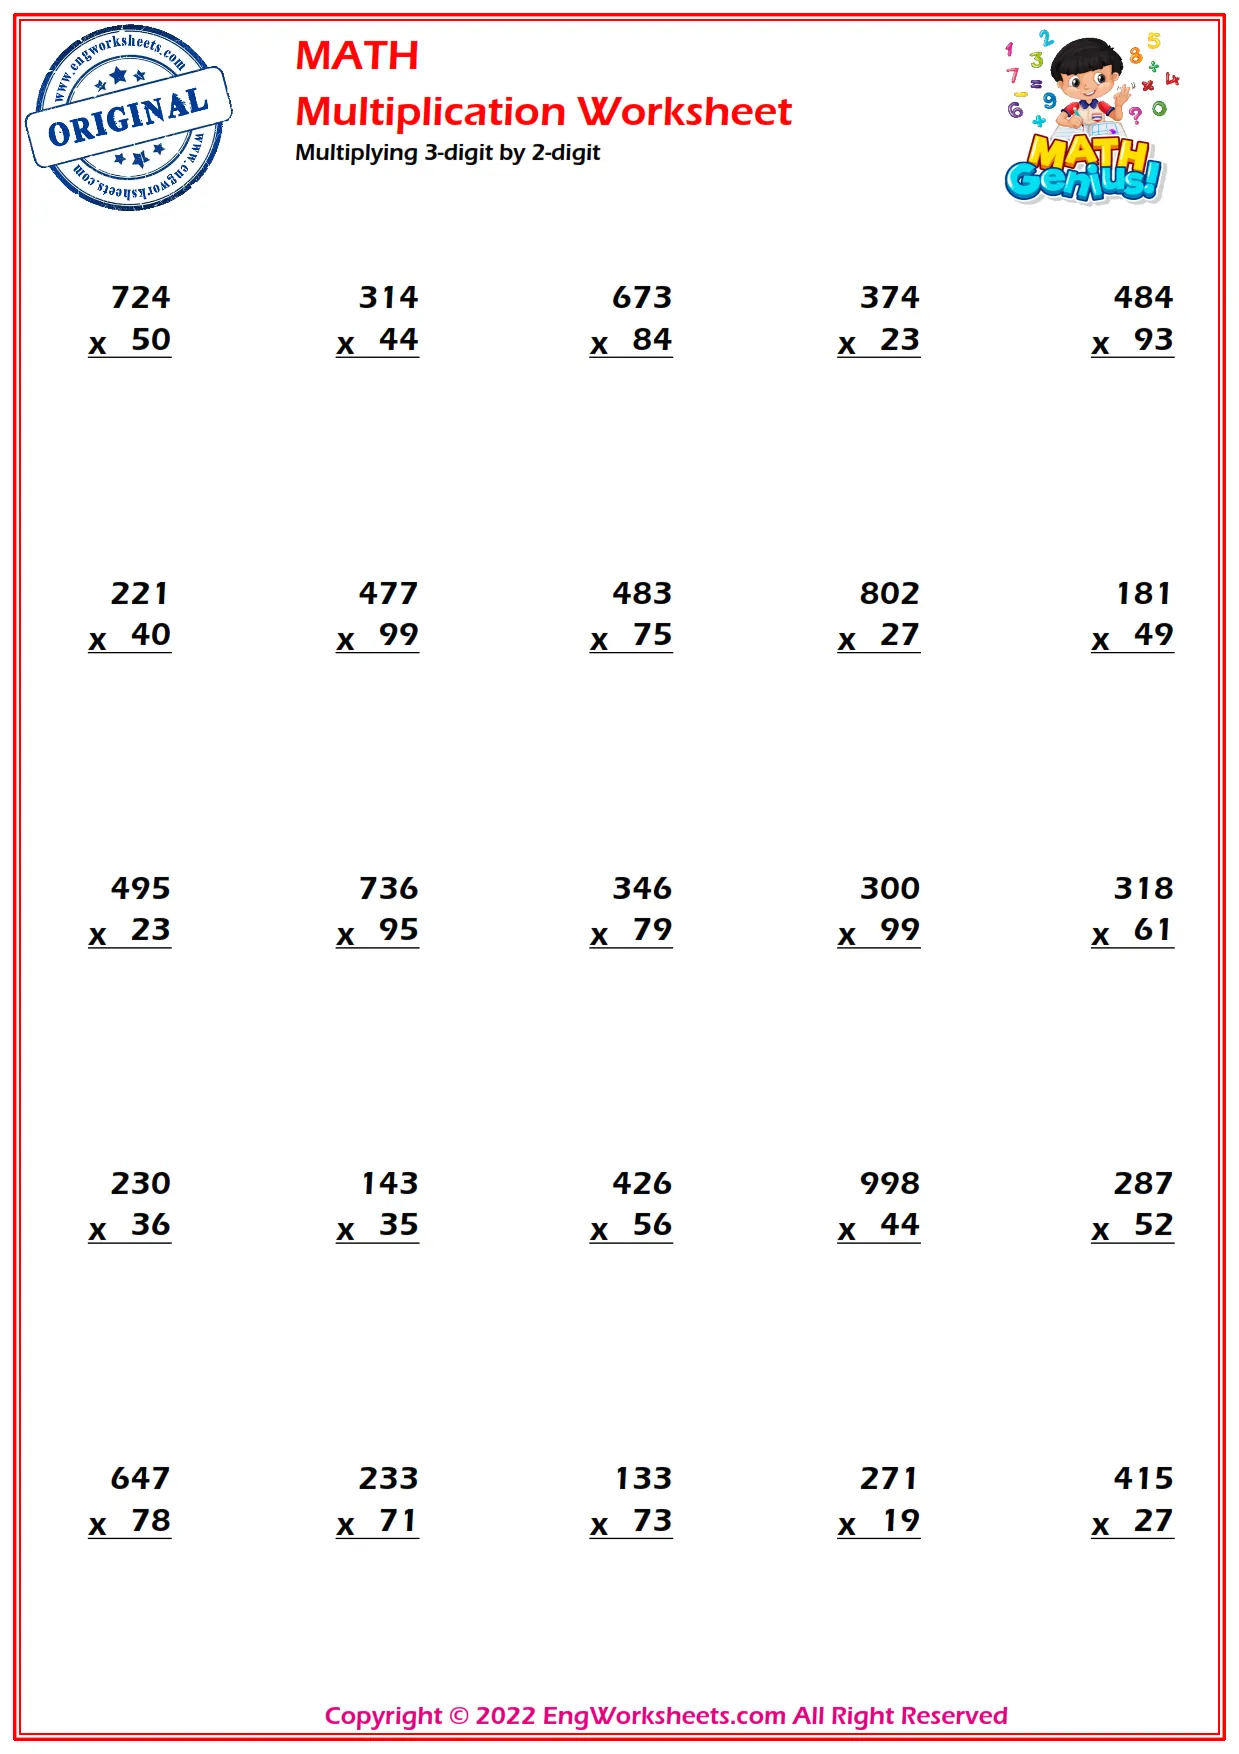 multiplying-3-digit-by-2-digits-worksheets-and-exercise-engworksheets